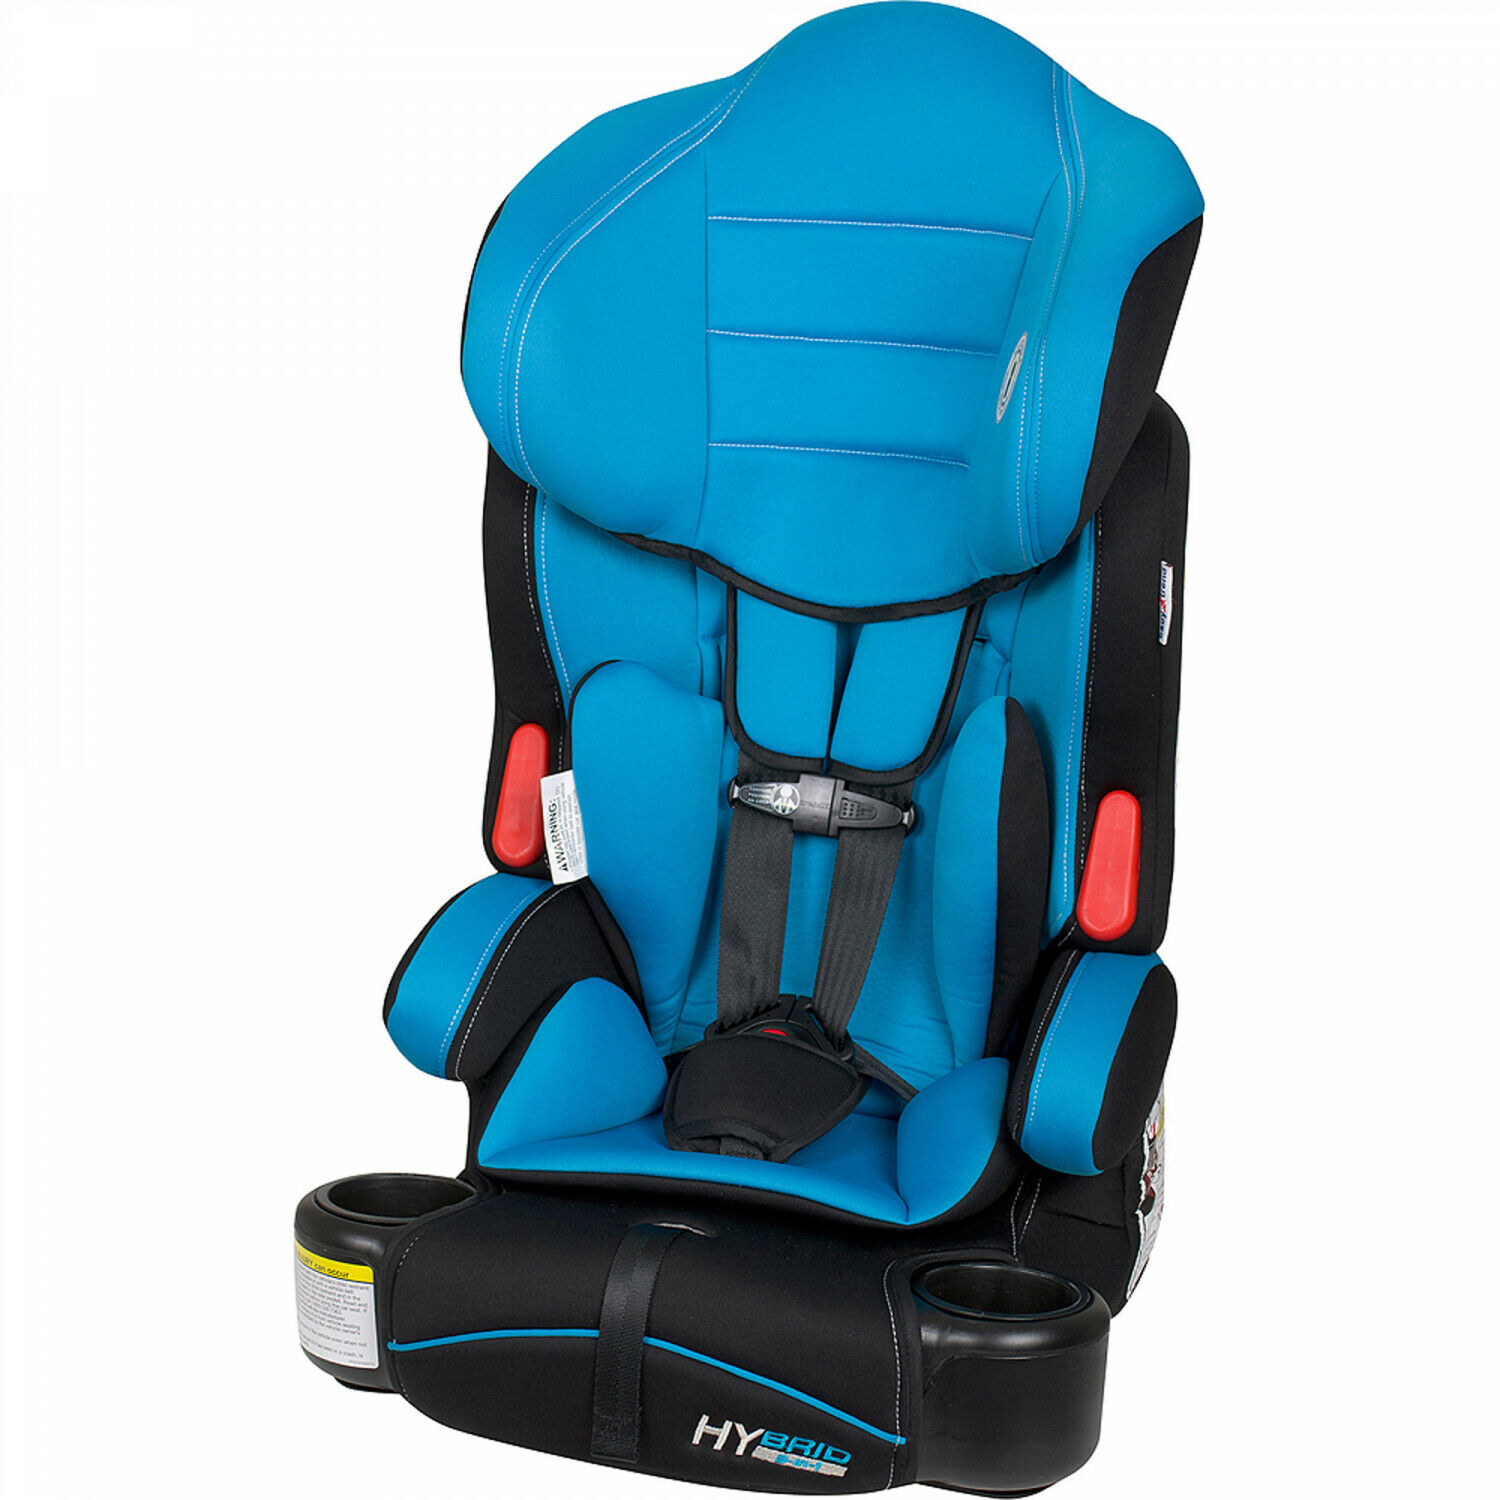 Wholesale hybrid 3-in-1 harness booster car seat, blue moon